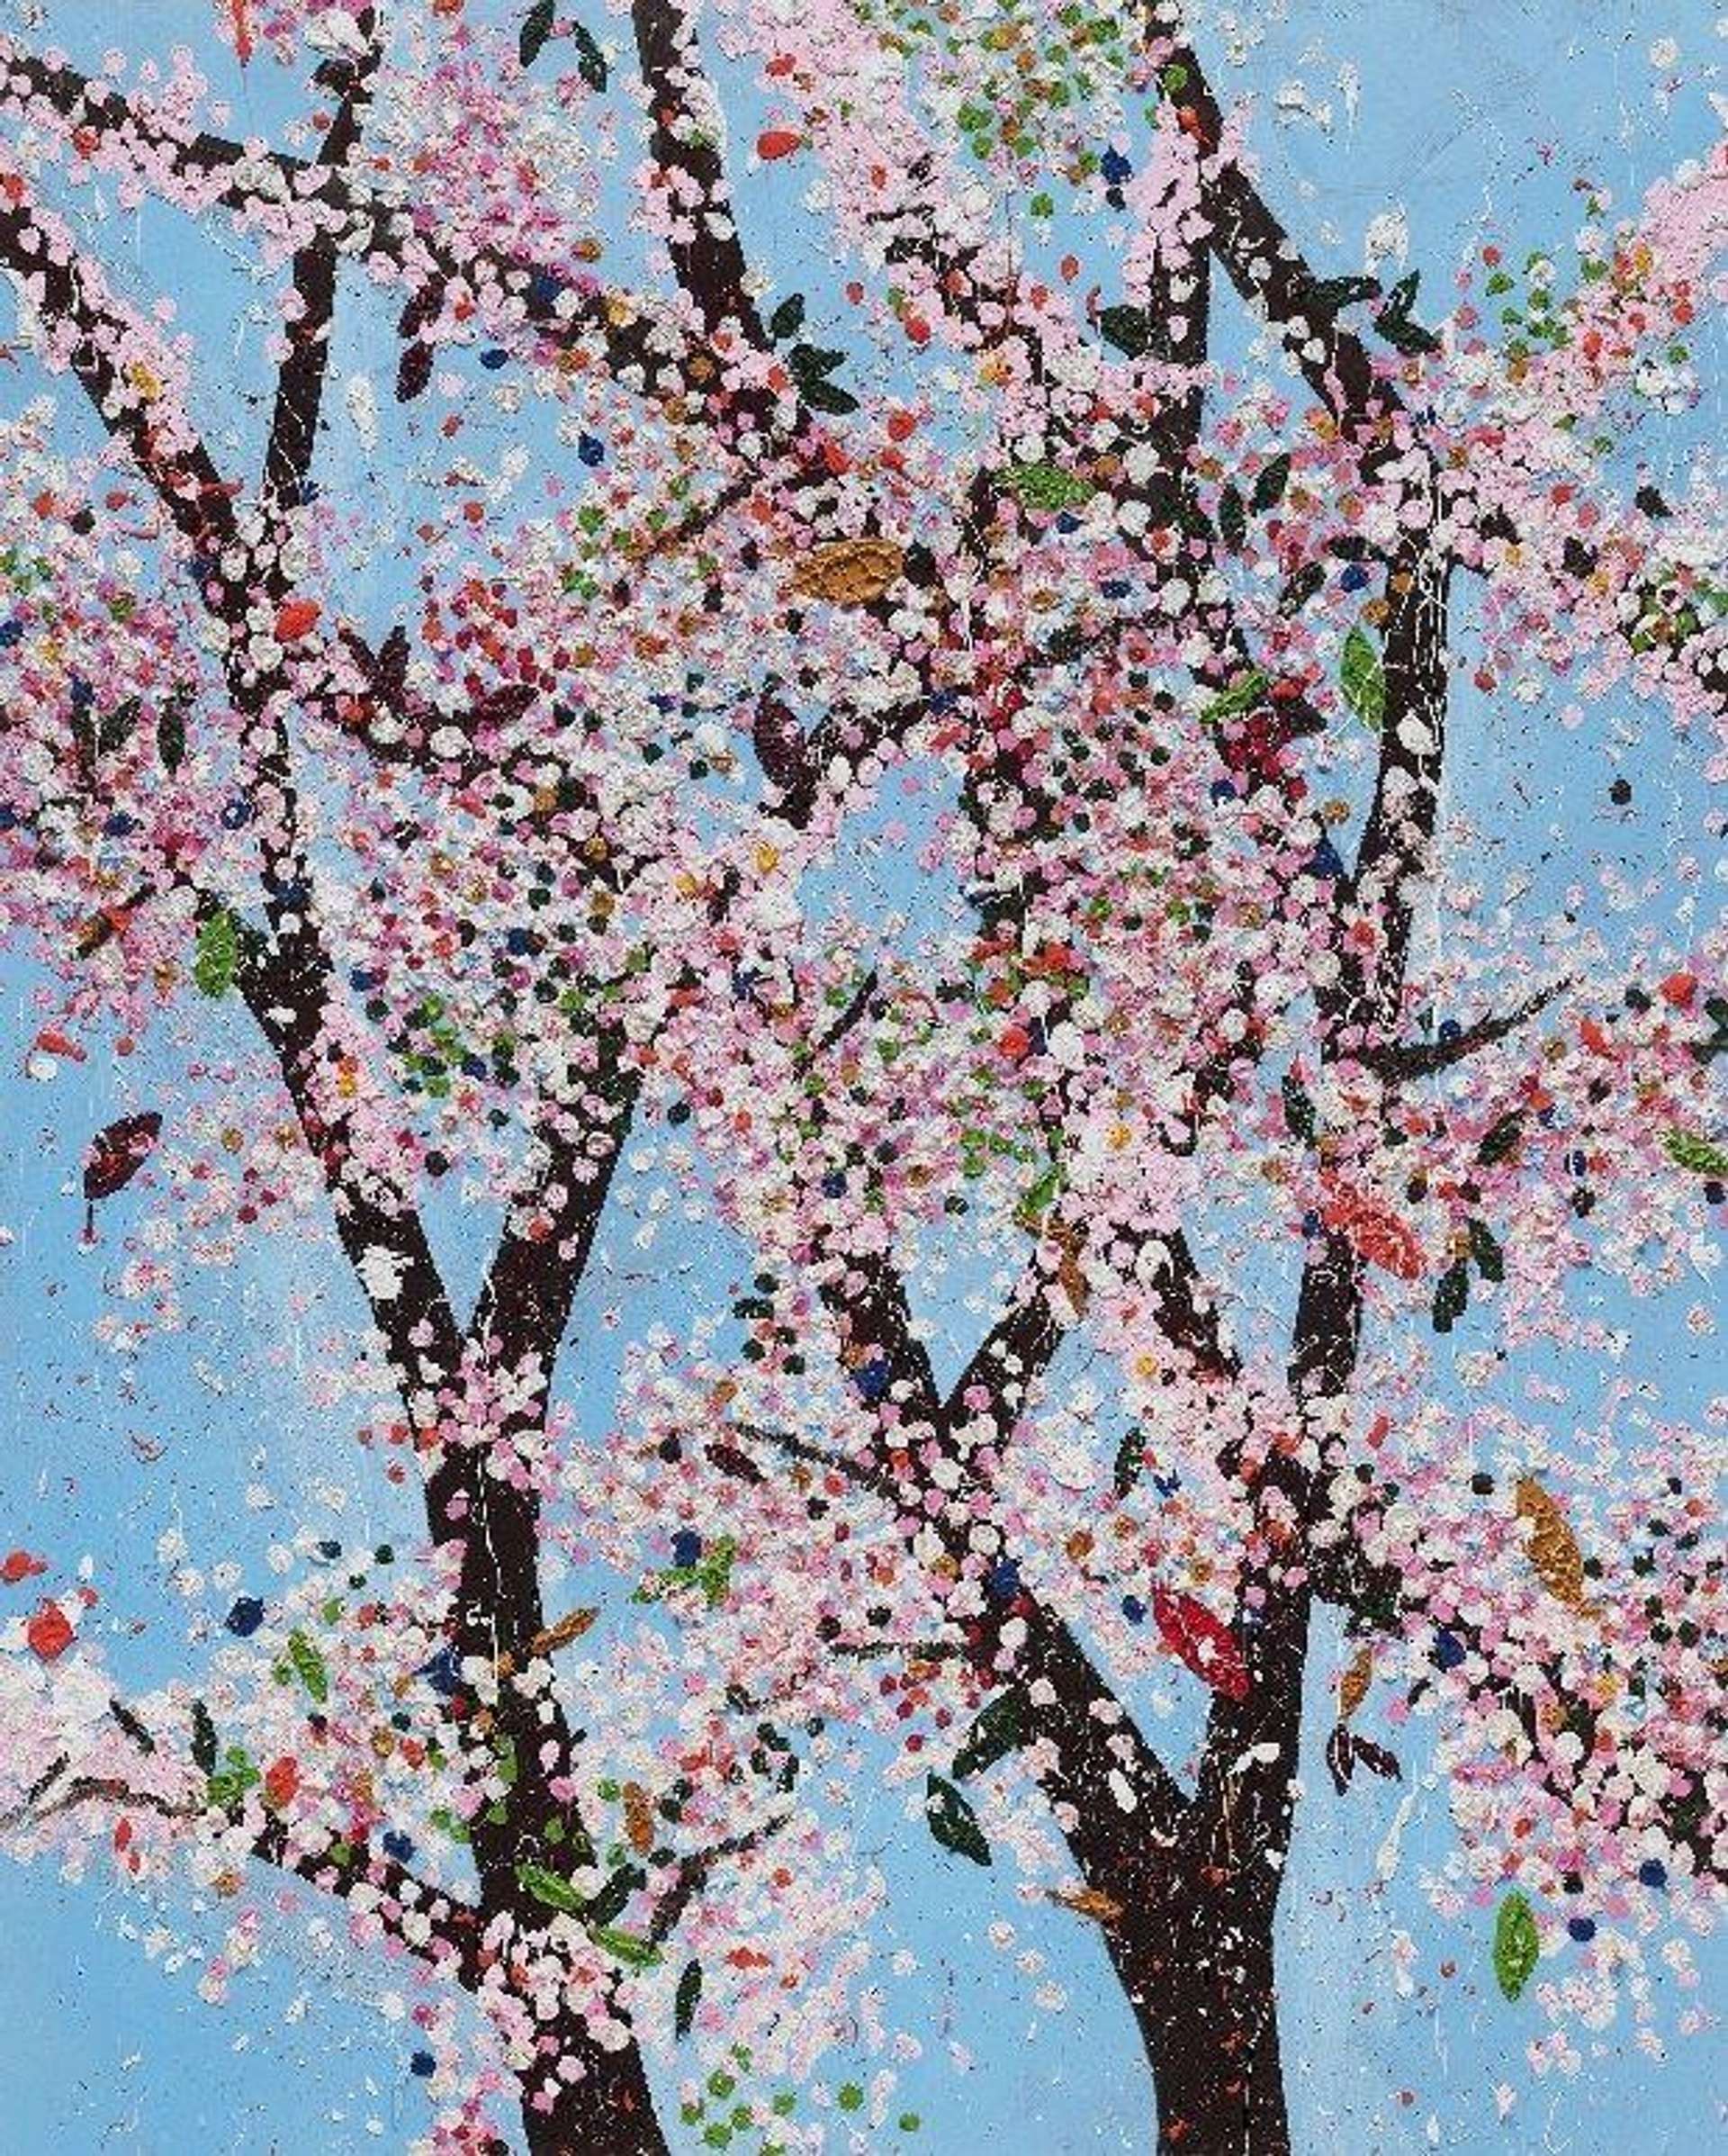 An image of the work H9-6 Honour by Damien Hirst. It shows two cherry blossom trees, depicted through bright colourful dots, against a blue sky.